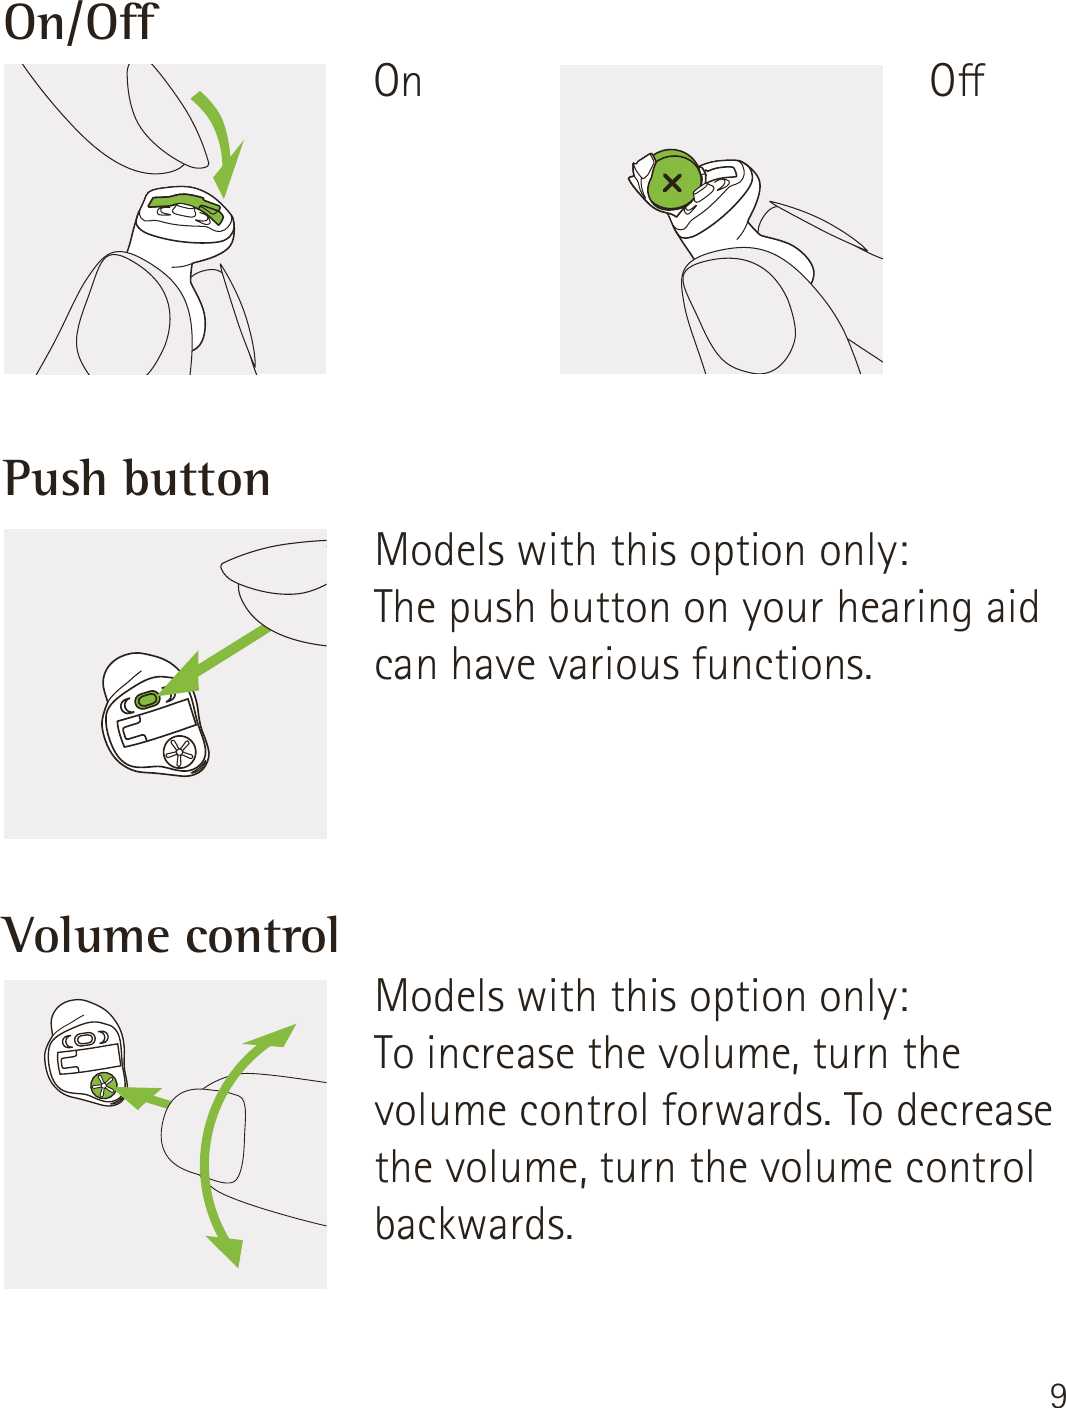 9On/OPush buttonVolume controlModels with this option only: The push button on your hearing aid can have various functions.Models with this option only:To increase the volume, turn the volume control forwards. To decrease the volume, turn the volume control backwards.OOn